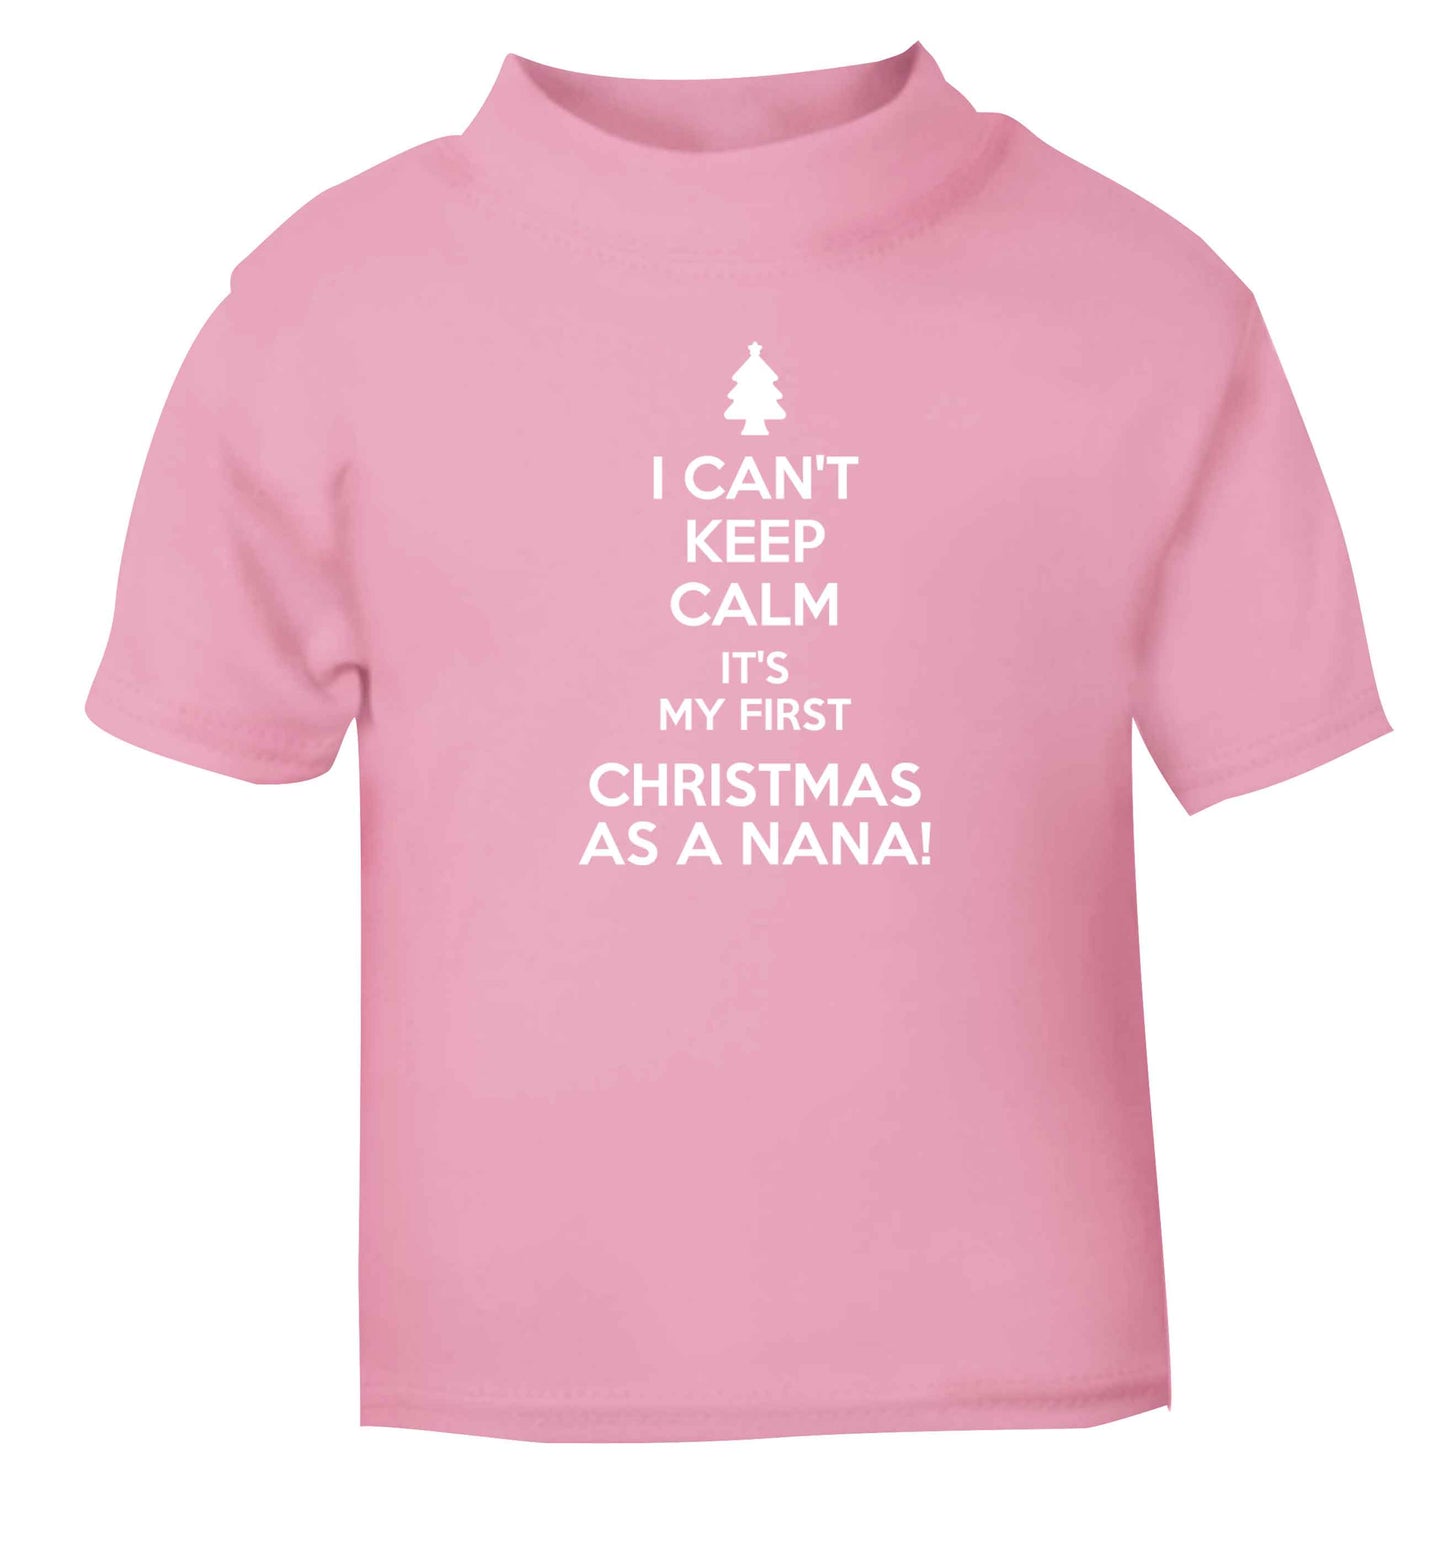 I can't keep calm it's my first Christmas as a nana! light pink Baby Toddler Tshirt 2 Years